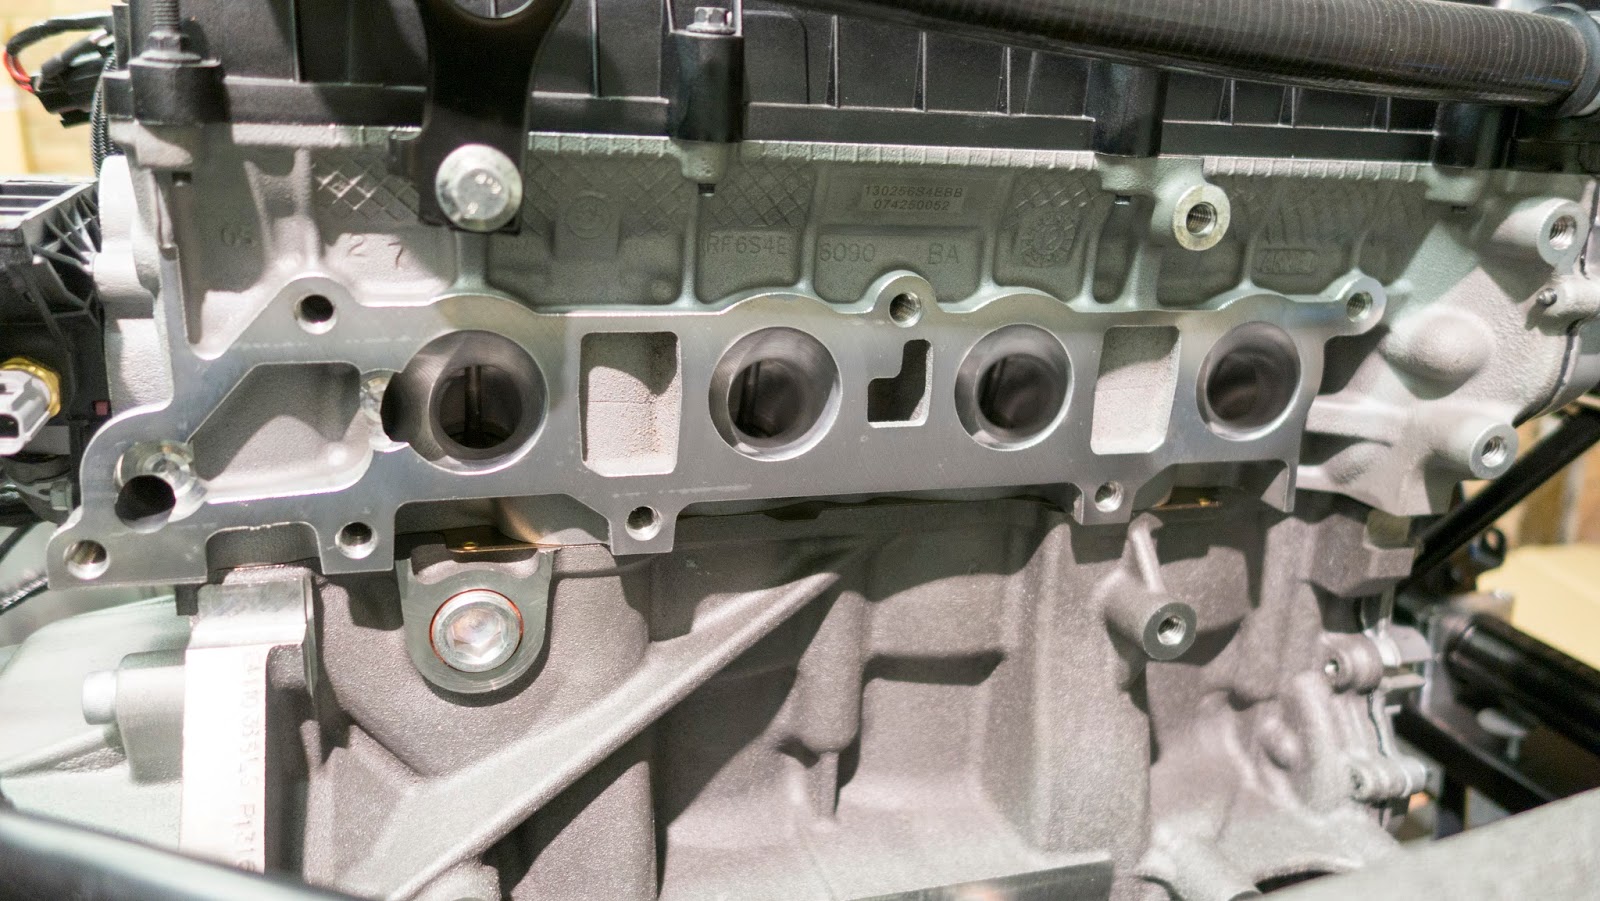 Exhaust manifold ports with gasket and covering tape removed.